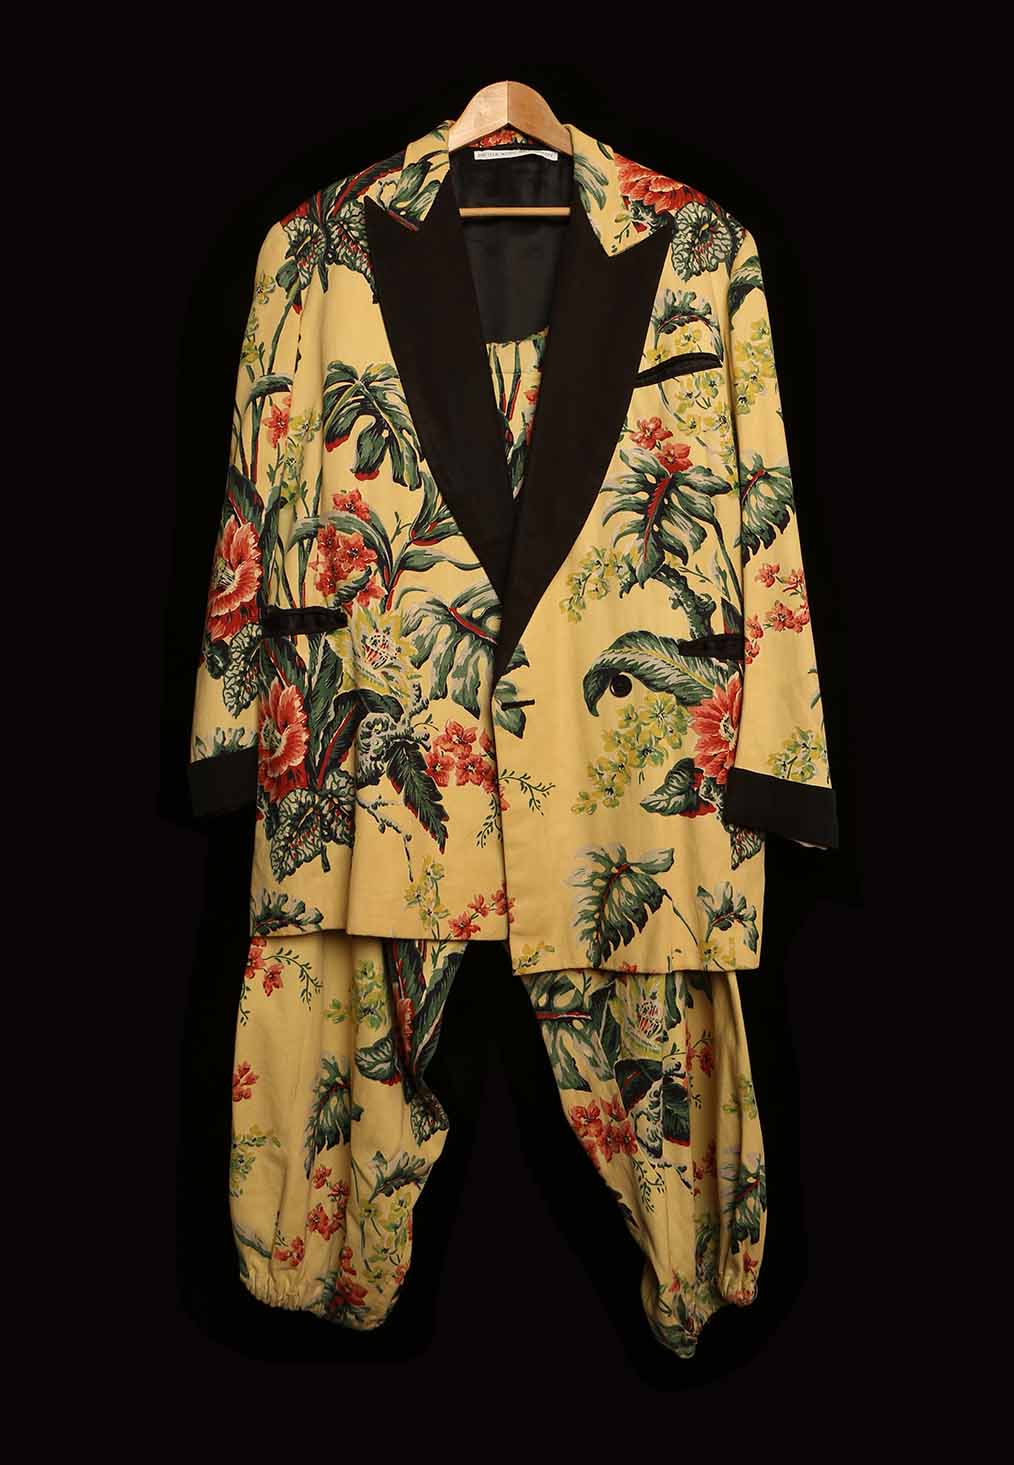 Suit worn by Max Miller, ‘the Cheeky Chappie'